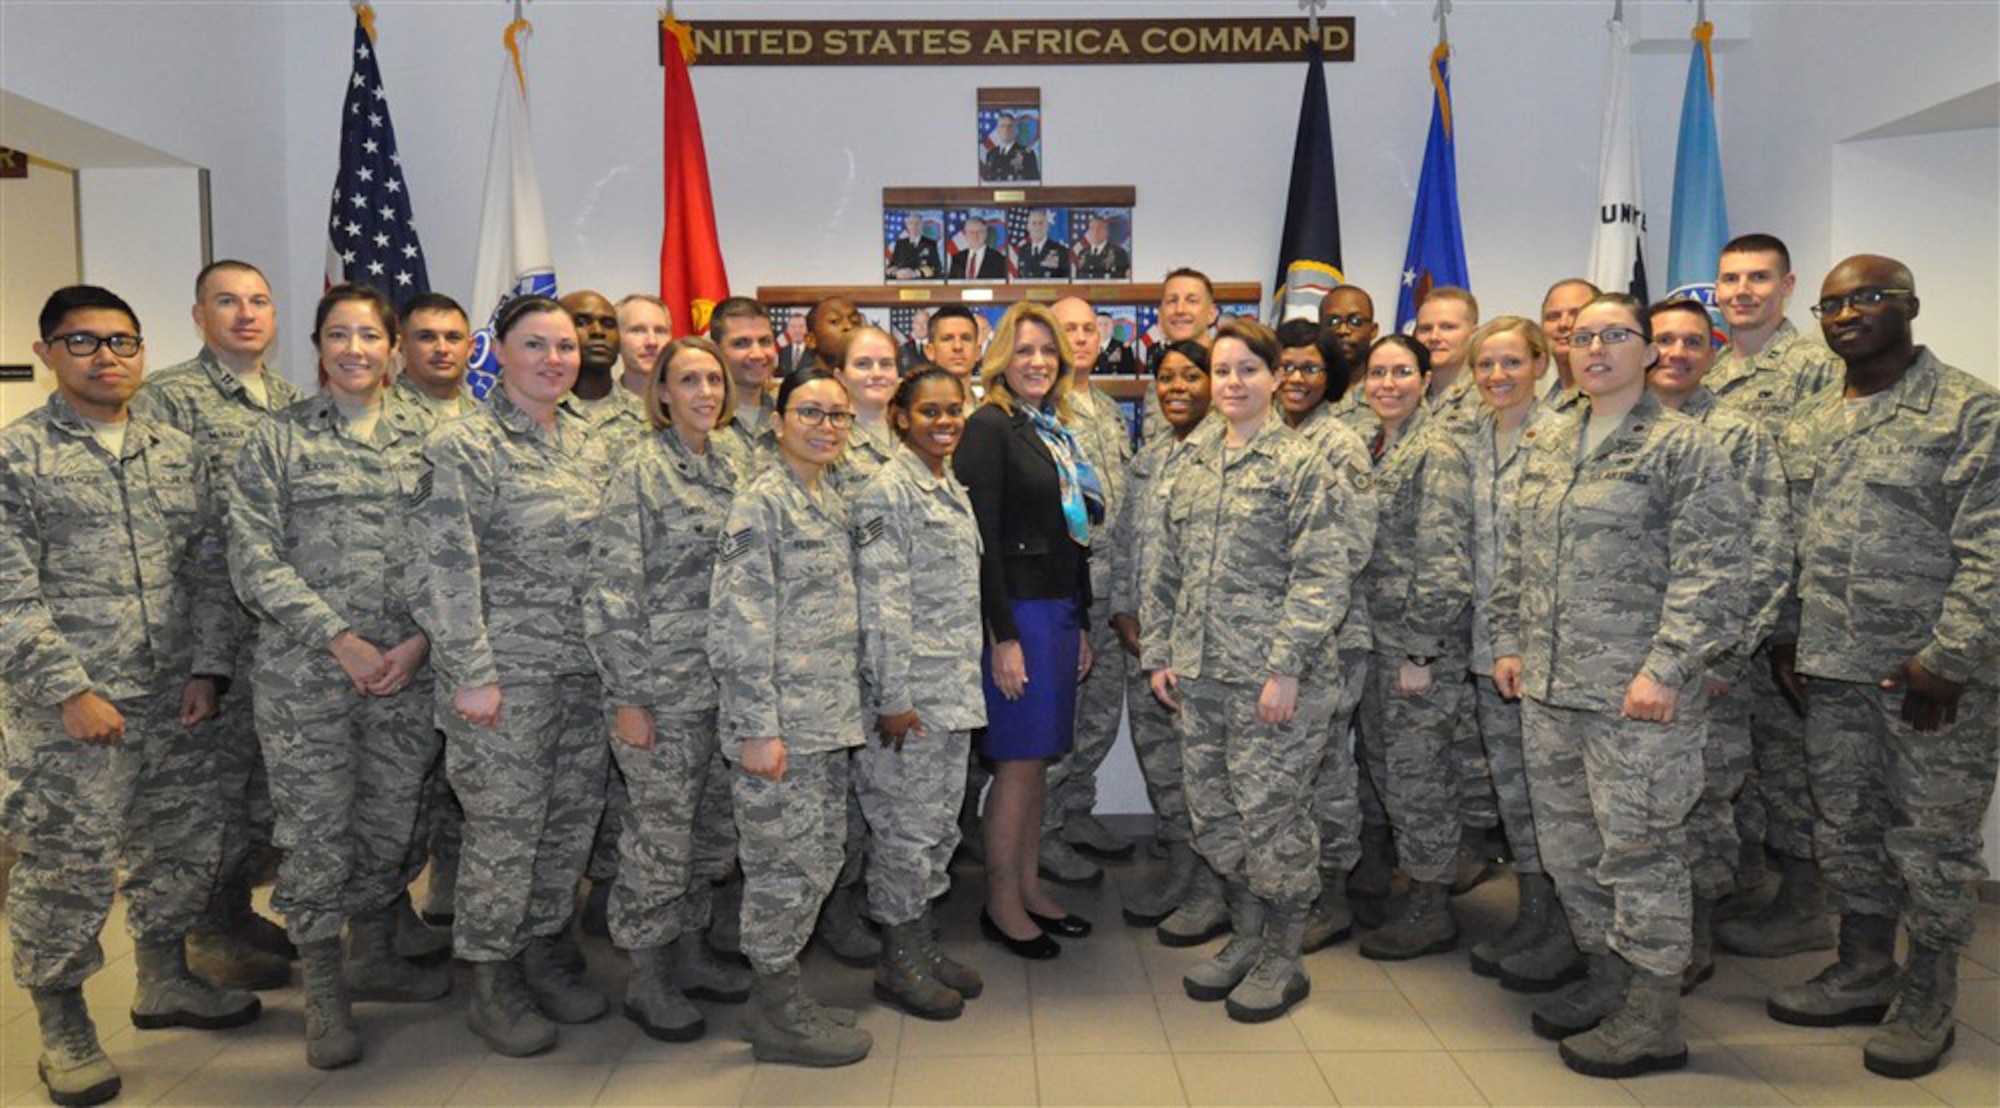 Secretary of the Air Force Deborah Lee James poses with Airmen stationed in Stuttgart, Germany, Nov. 18, 2015. The secretary's visit to U.S. Africa Command concluded with an Airmen's Call where she discussed her top priorities for the Air Force. (Department of Defense photo/Brenda Law)